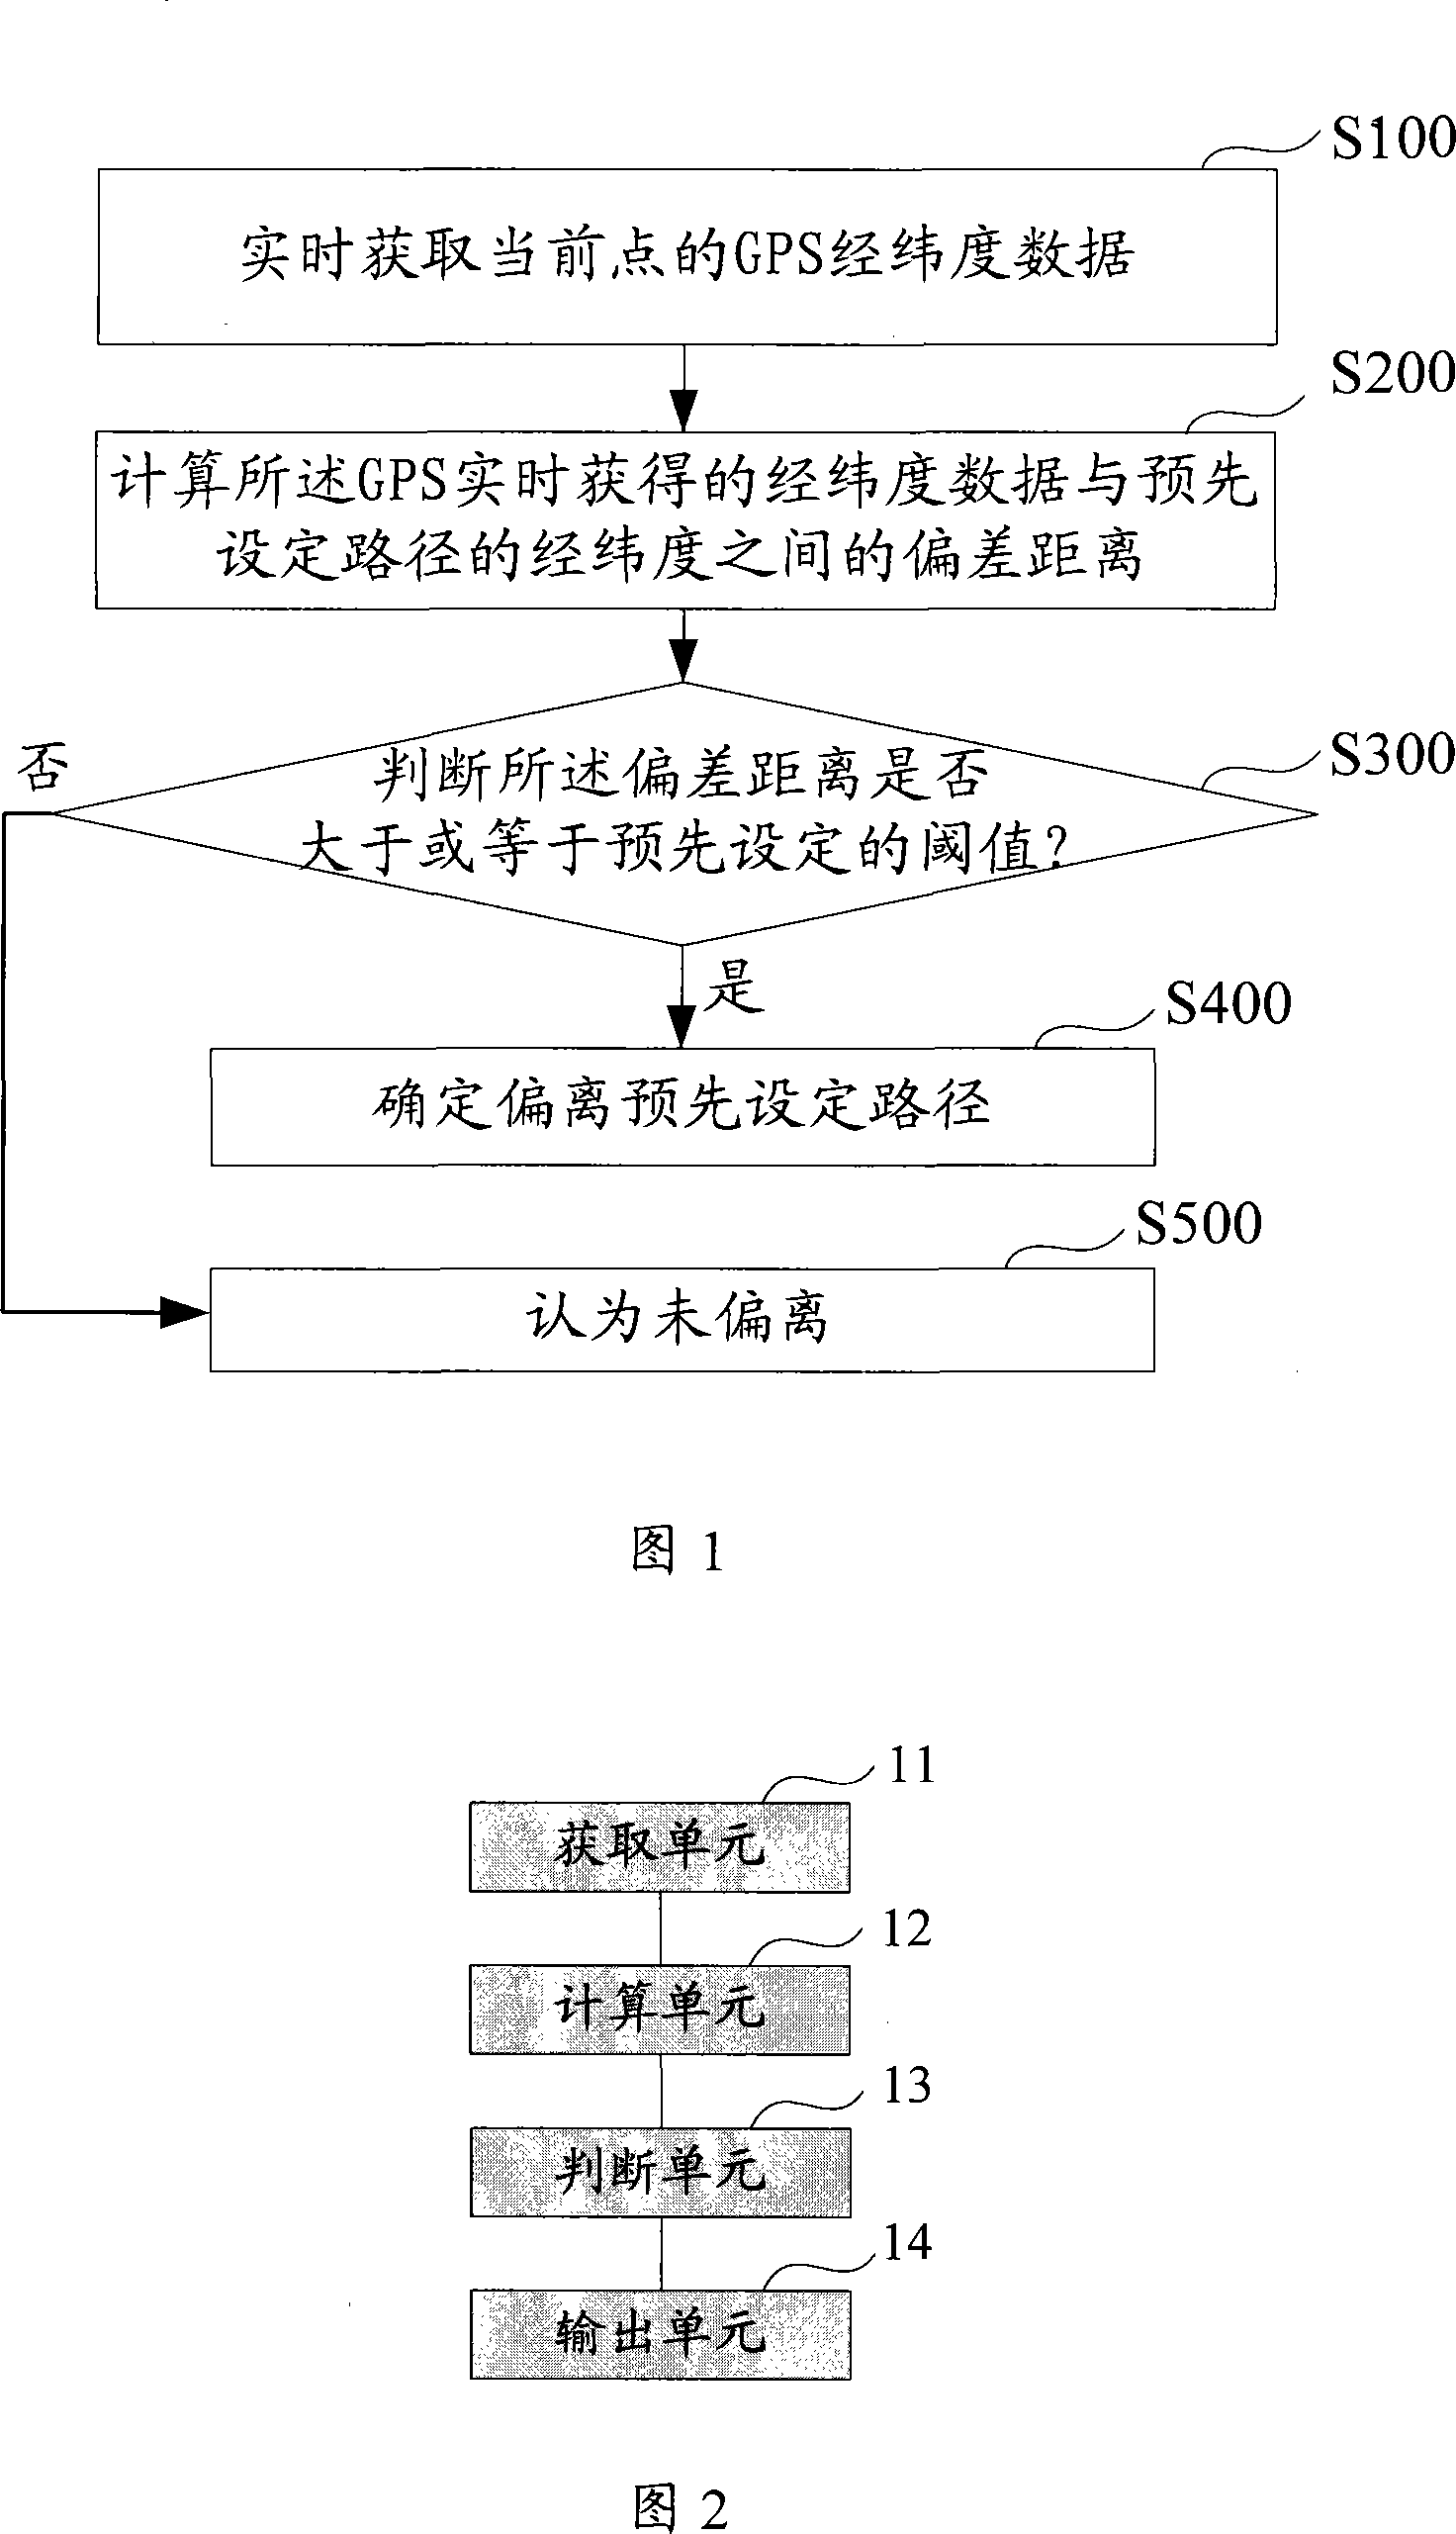 Method and system for intercomparison of route